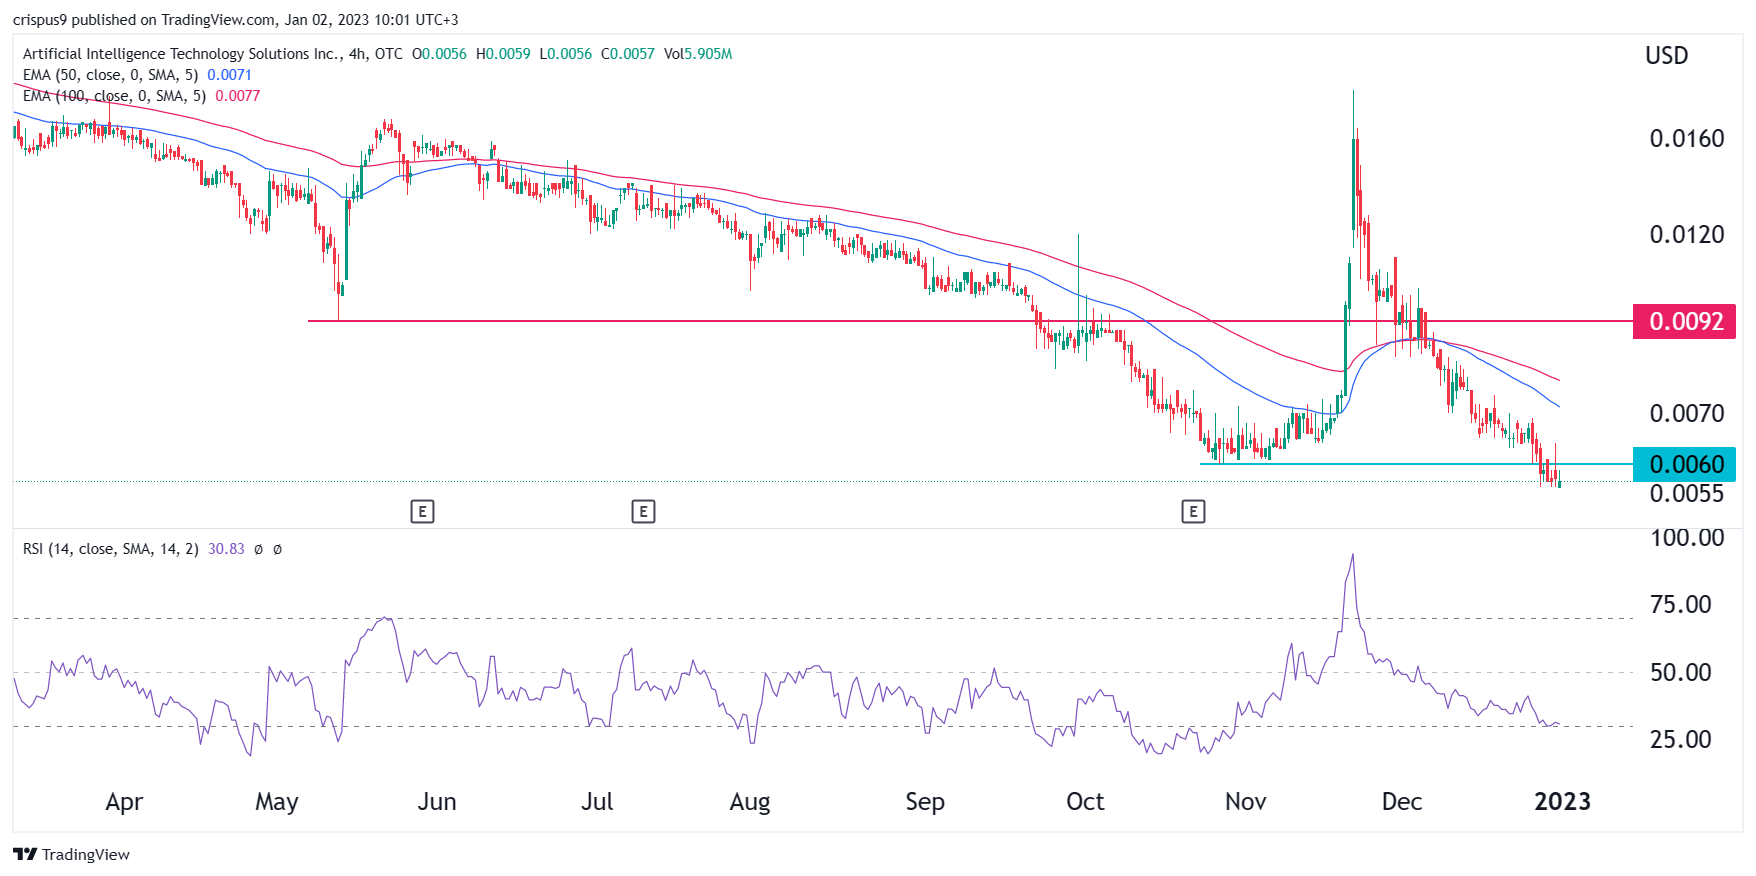 AITX Stock Price Forecast 2023 What Next for This Penny Stock?